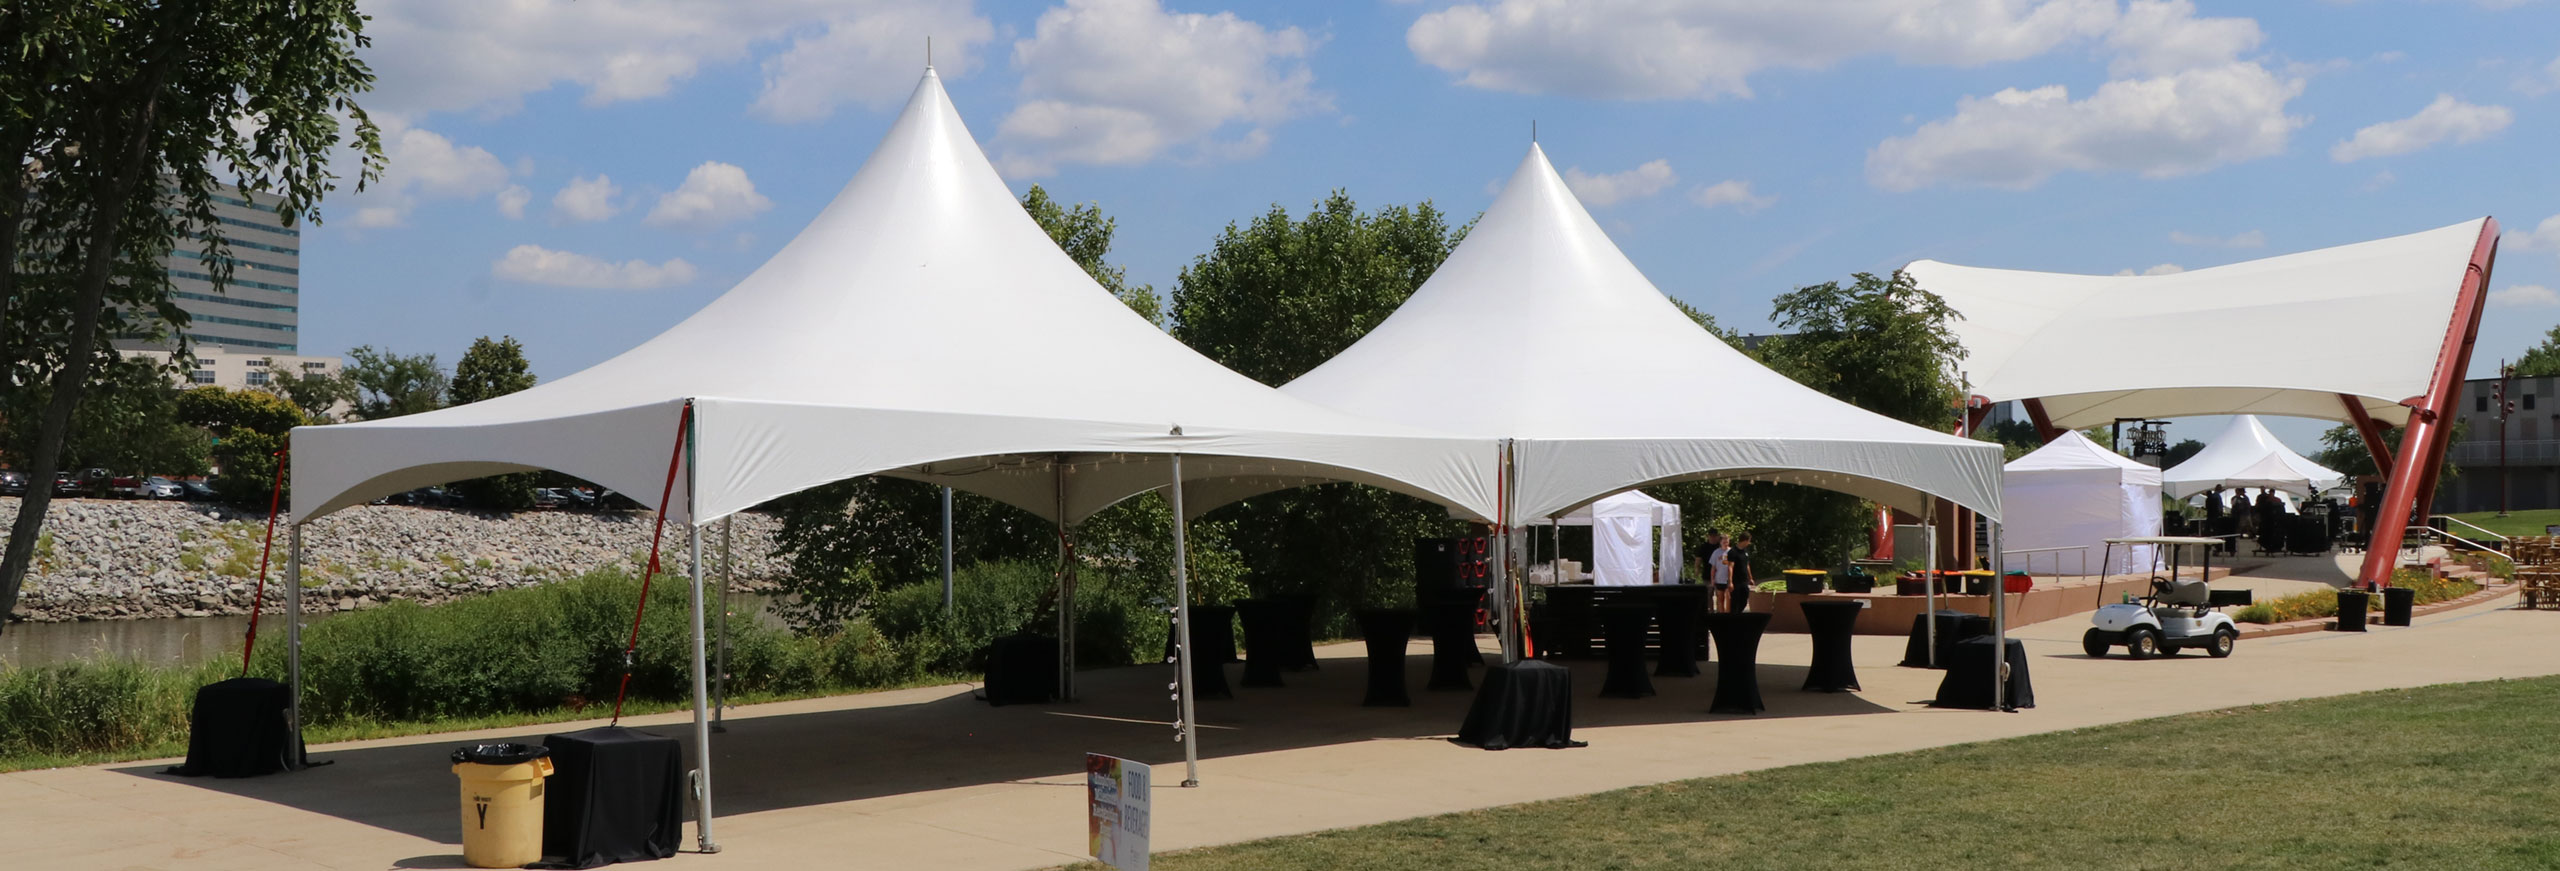 college event tents